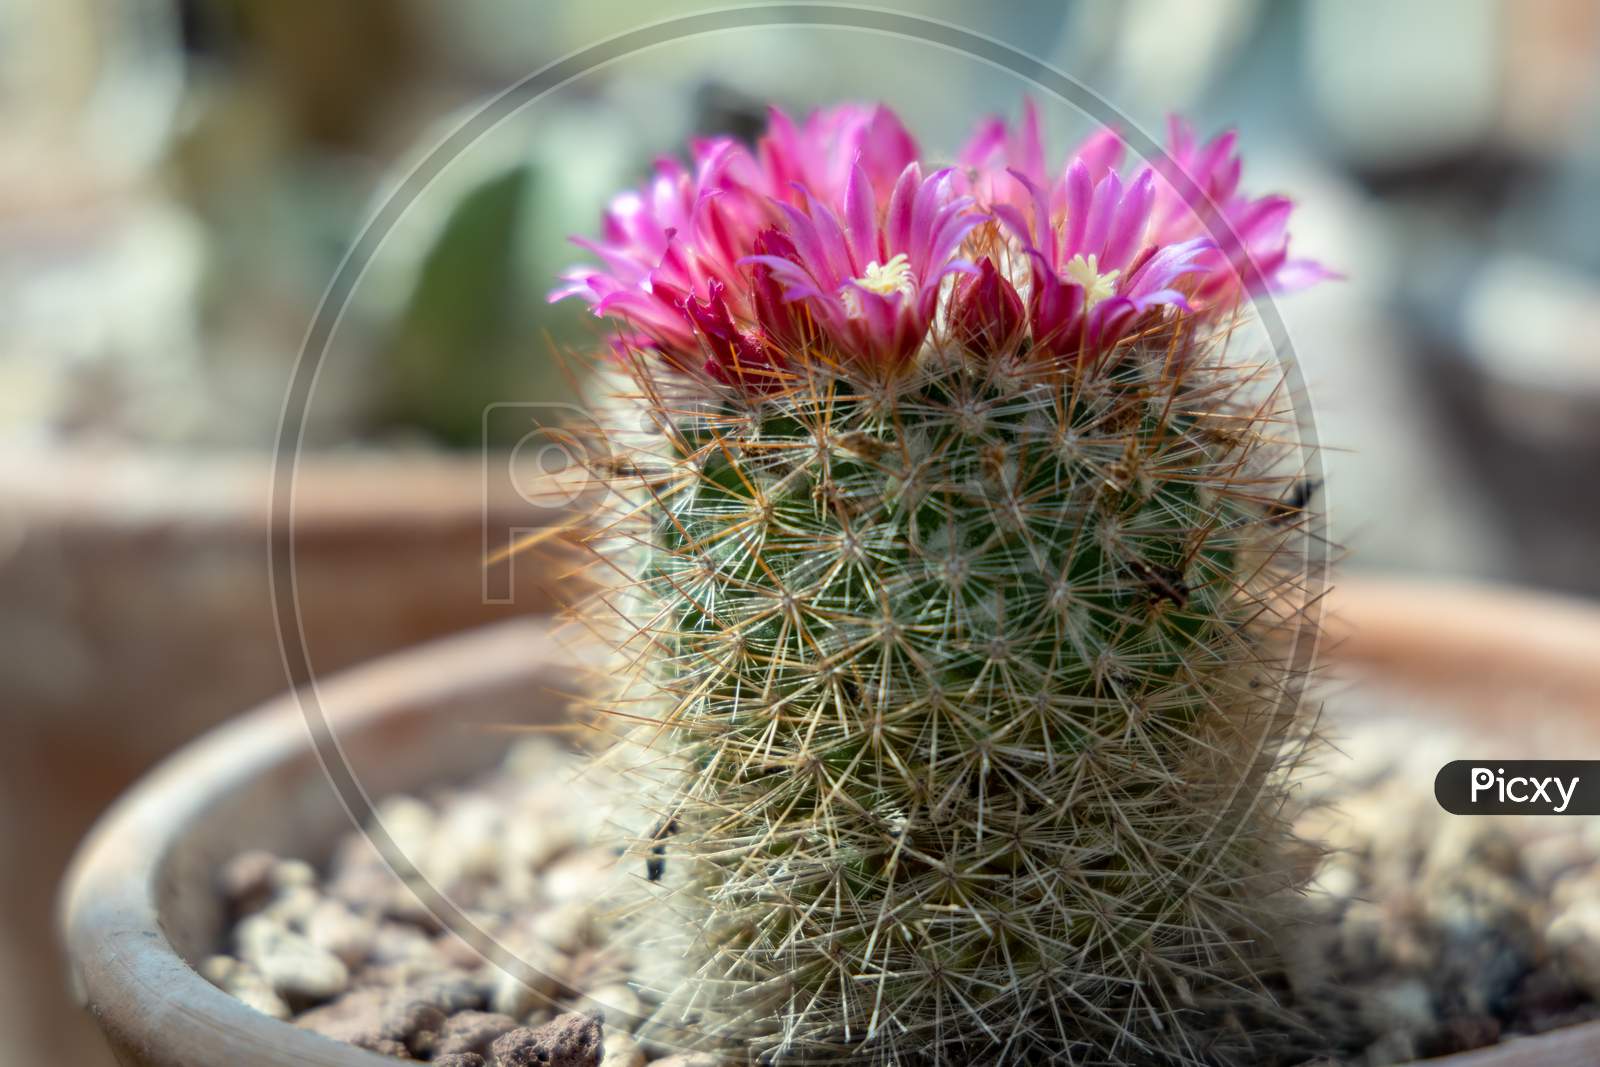 Cactus Growing In A Terracotta Pot With Pink Flowers